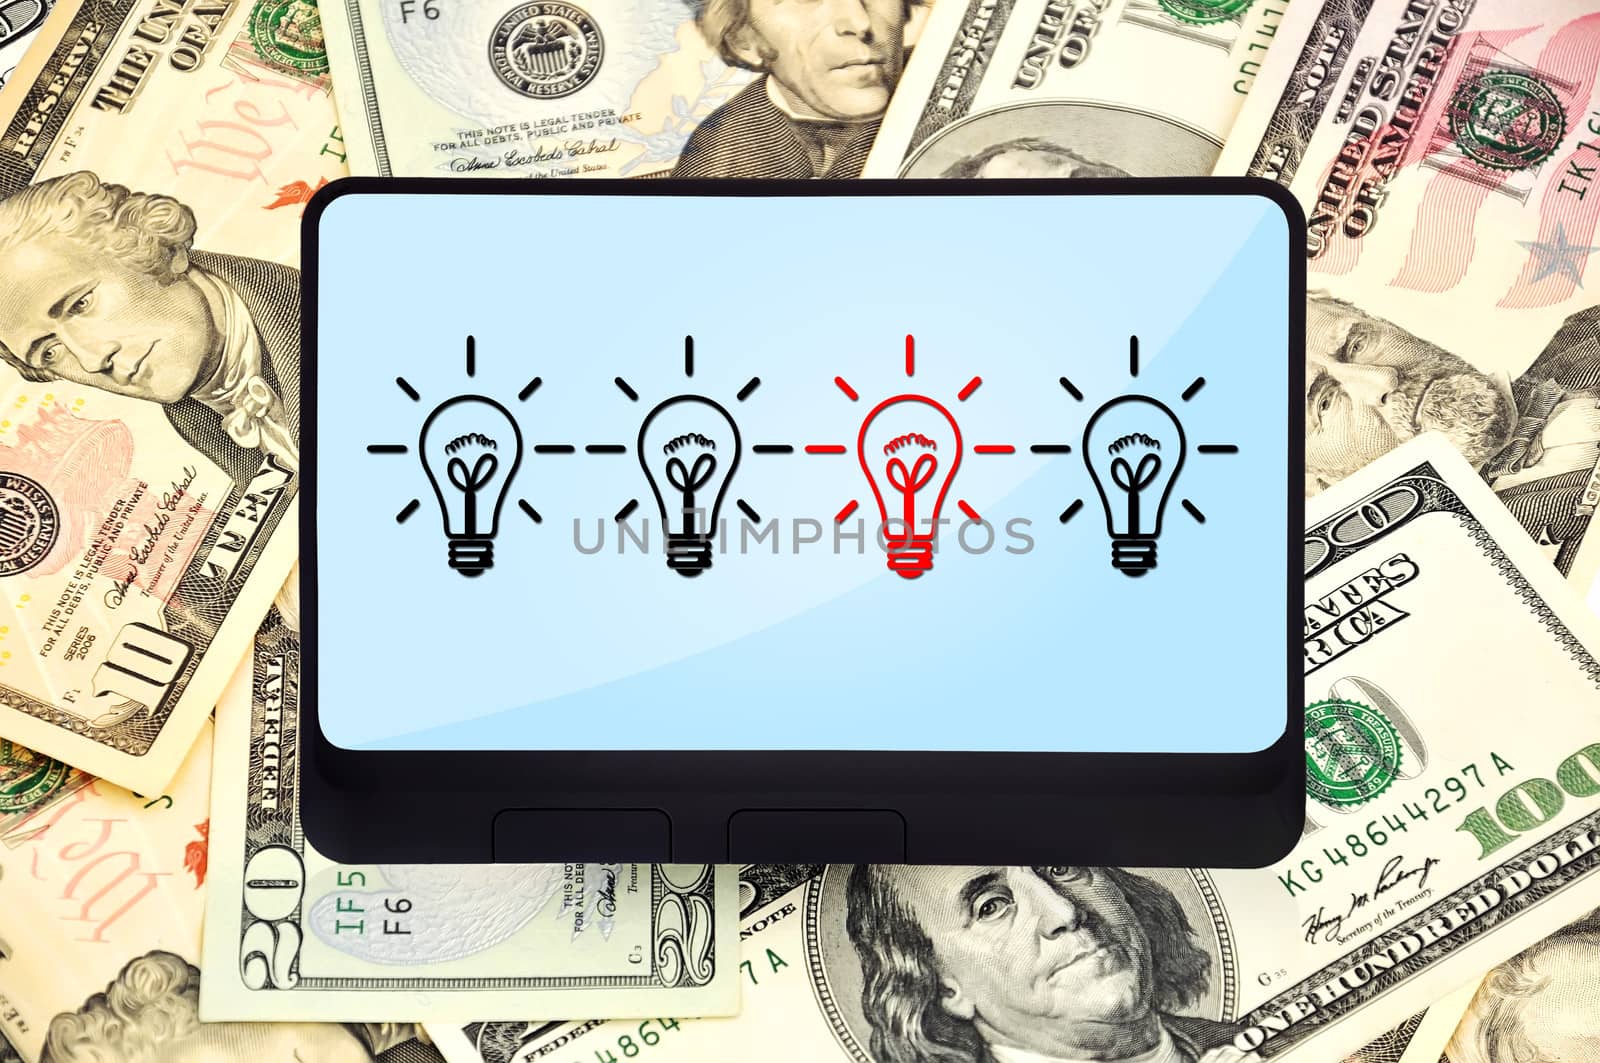 digital tablet with lamps on background of dollars